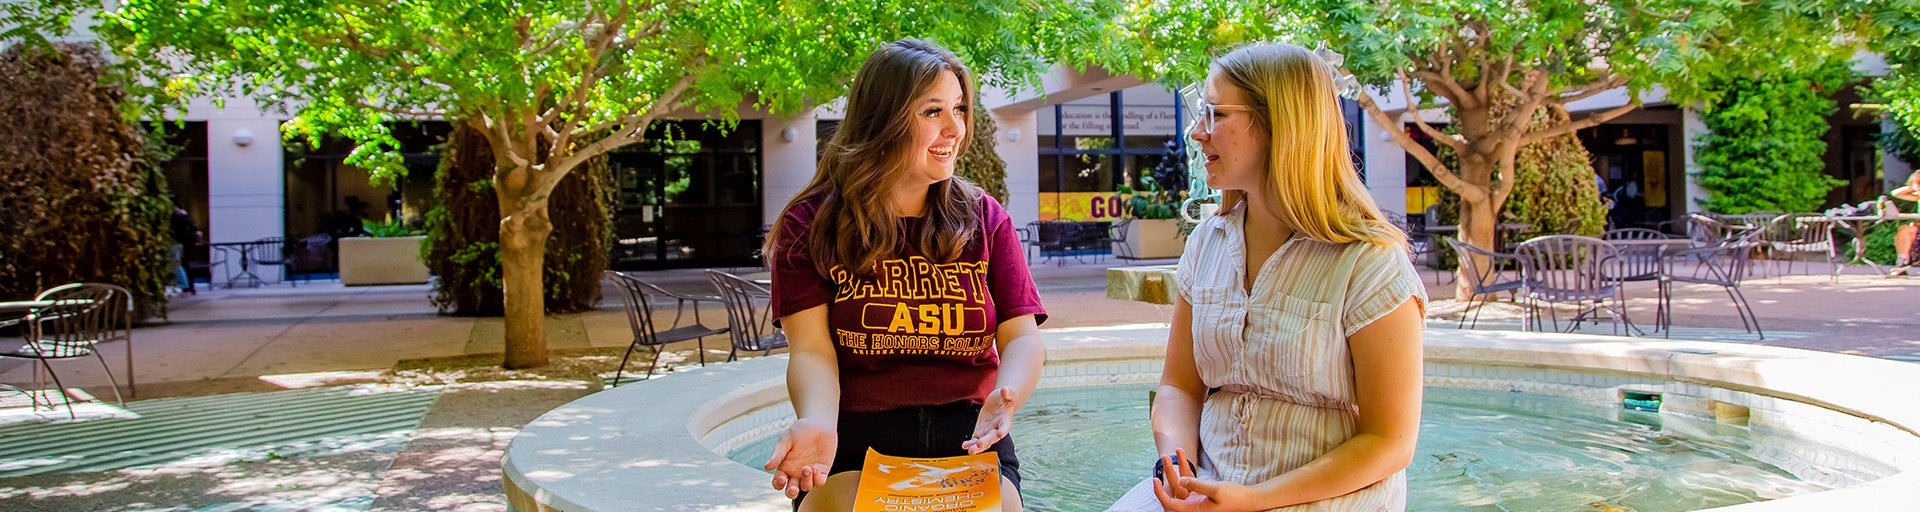 Two Barrett students having a conversation by a fountain